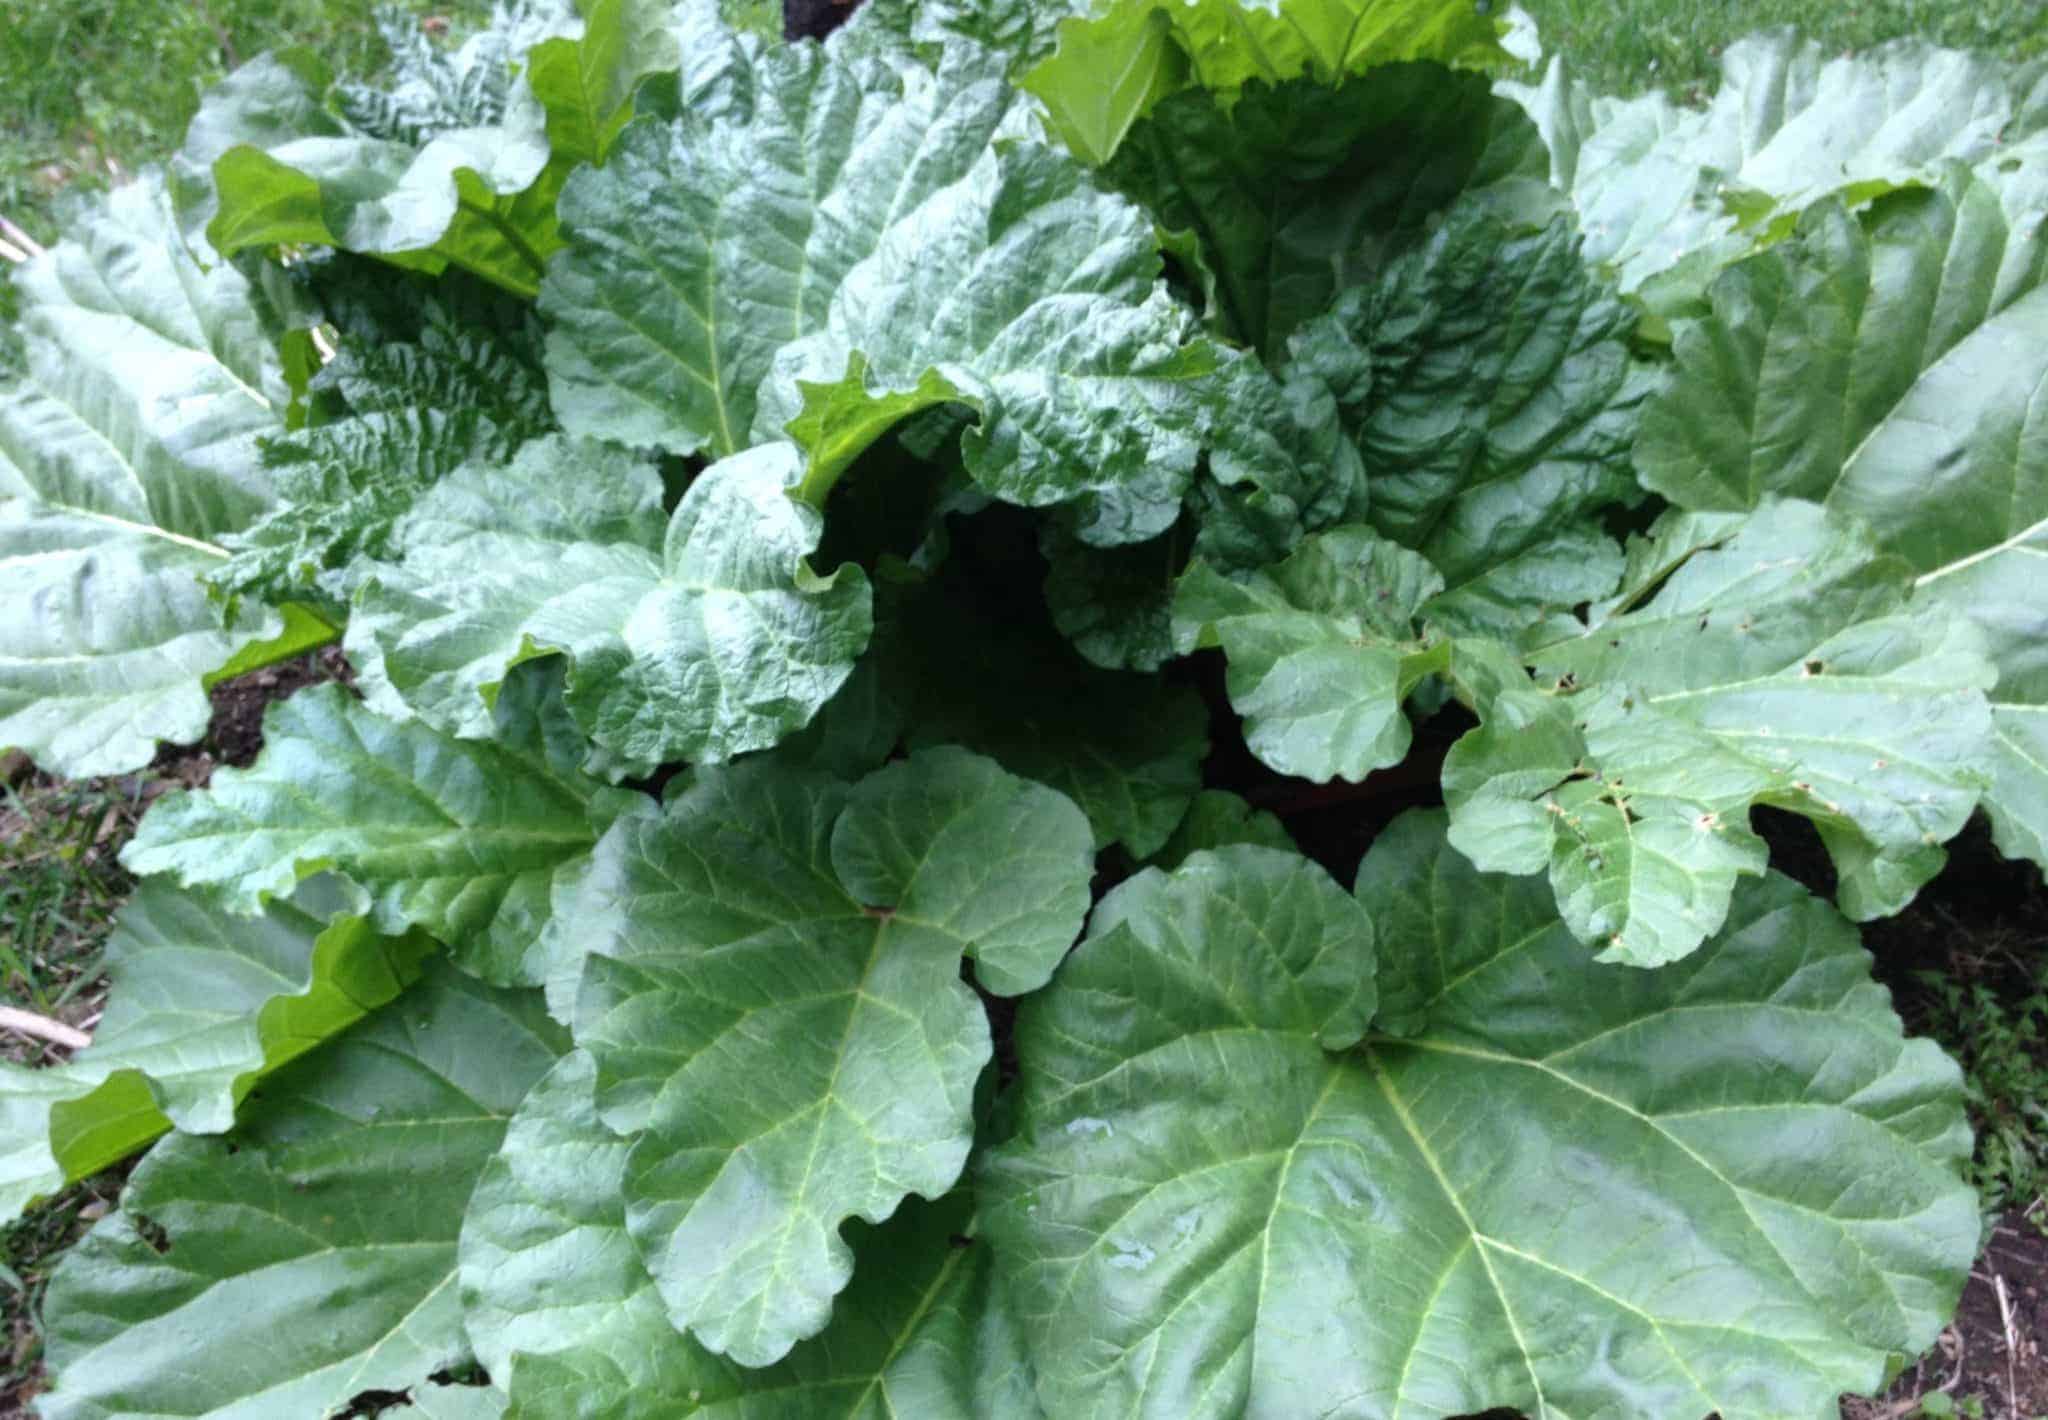 A rhubarb plant filled with large green leaves in the garden.